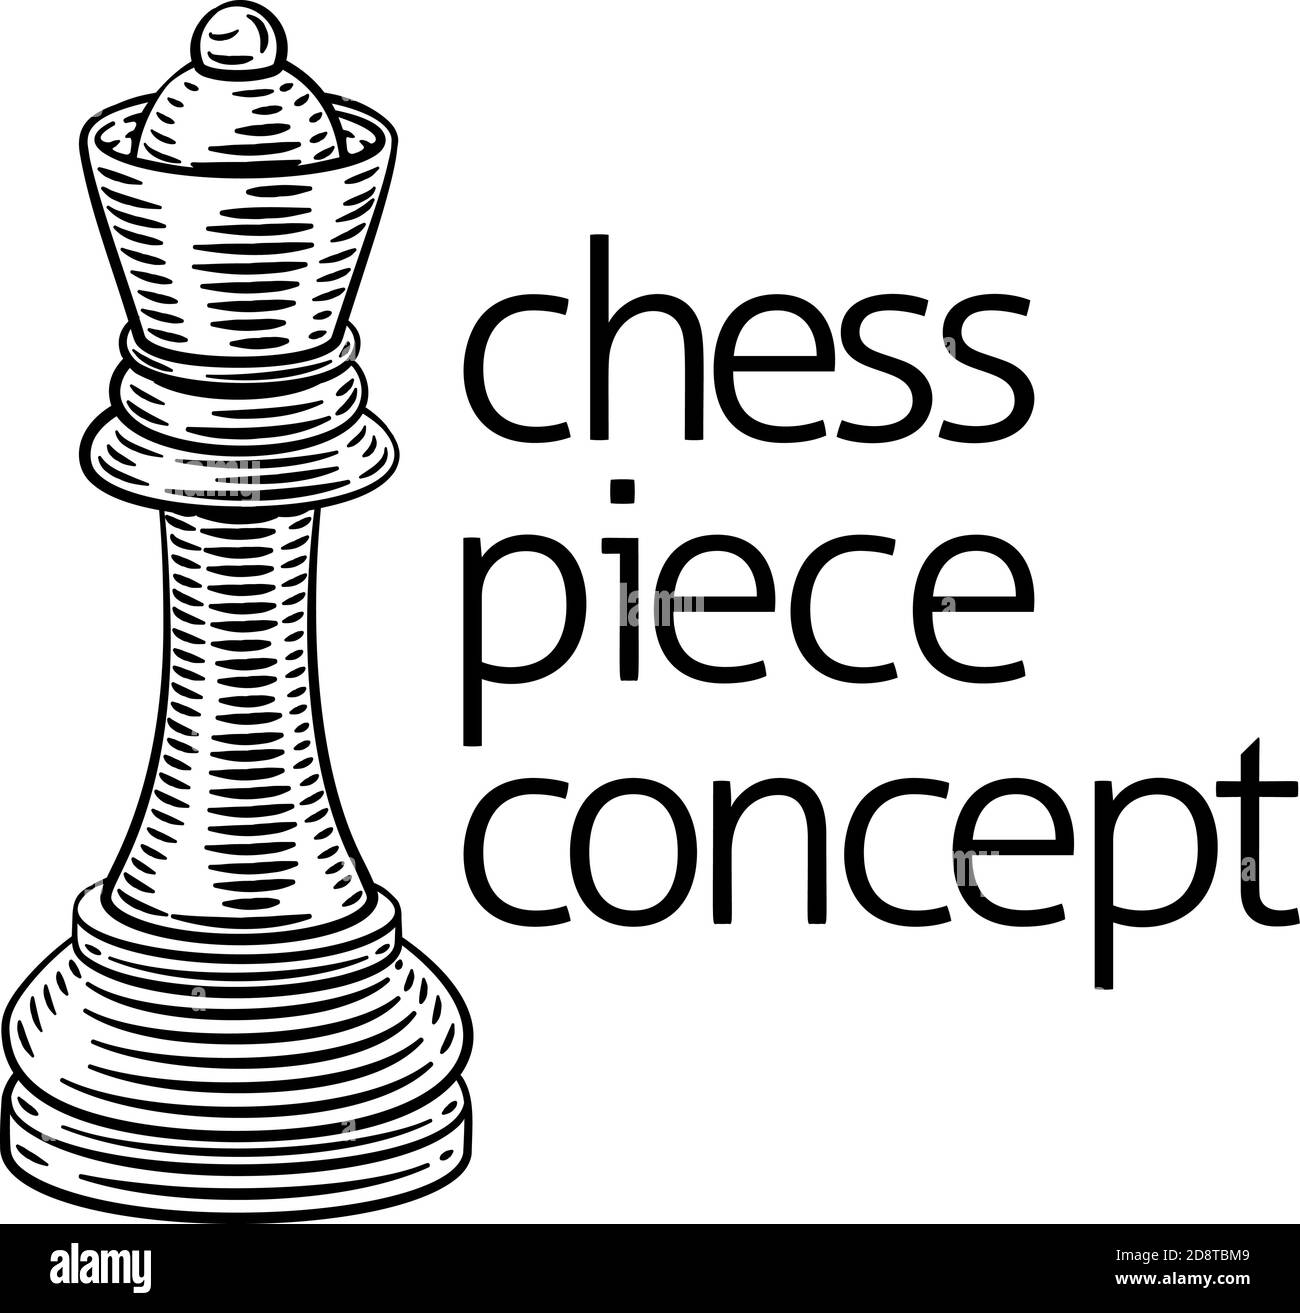 Queen Chess Piece Vintage Woodcut Style Concept Stock Vector